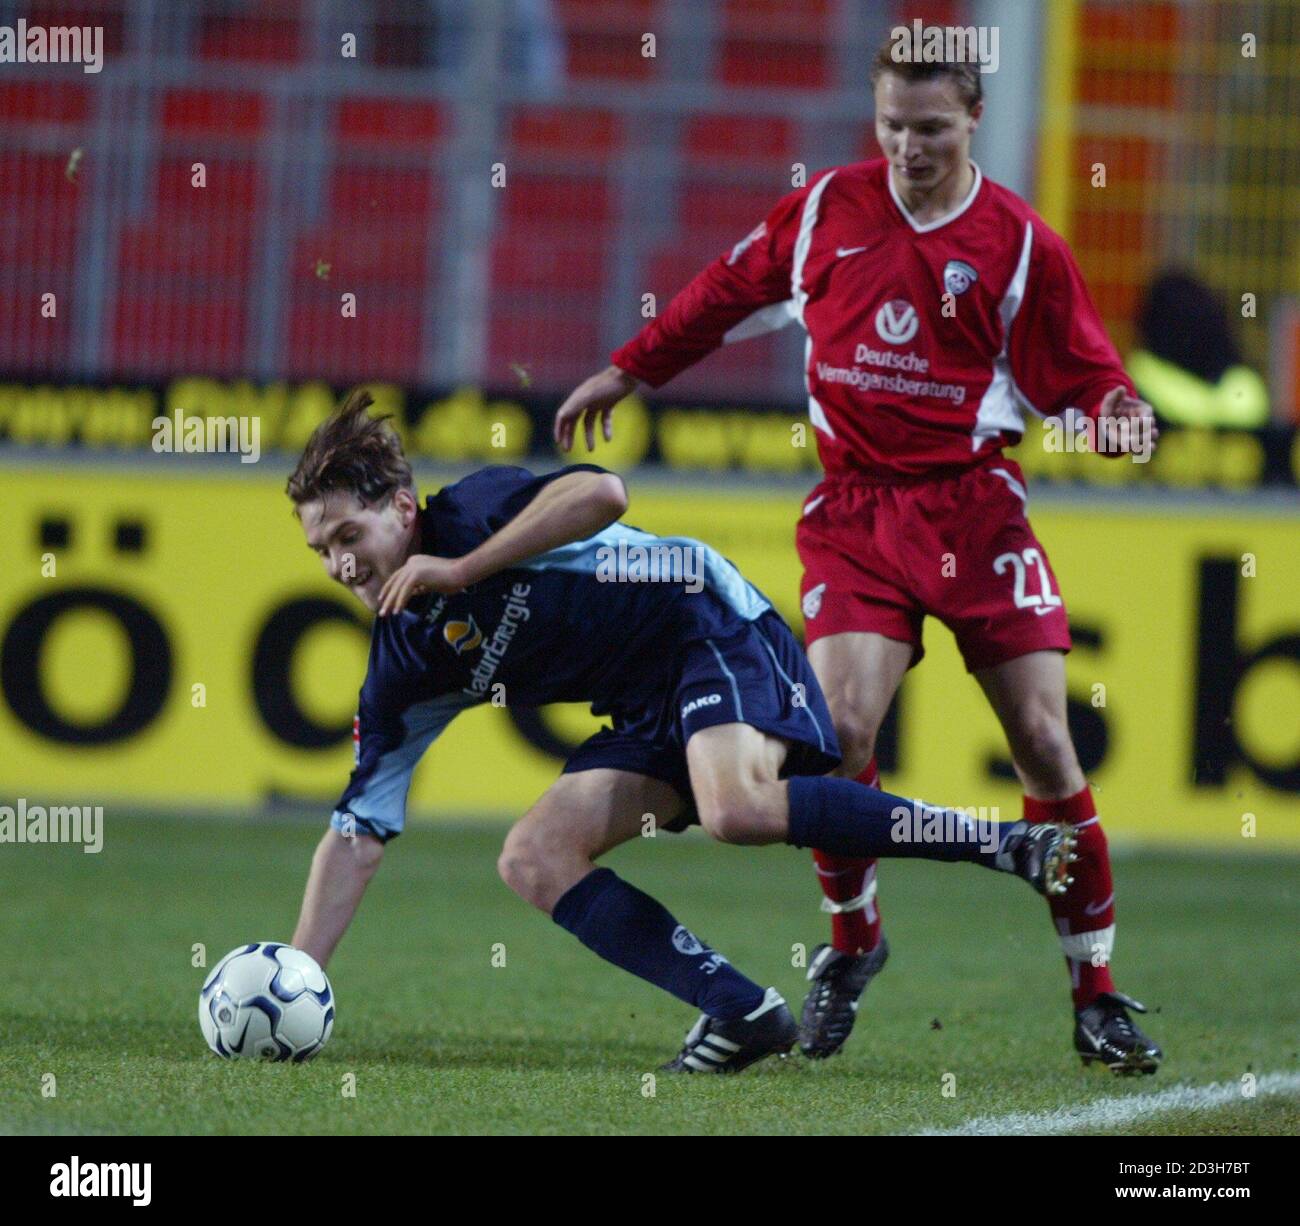 TIMM OF KAISERSLAUTERN CHALLENGES MAENNER OF SC FREIBURG DURING THEIR GERMAN SOCCER CUP MATCH IN KAISERSLAUTERN. Stock Photo